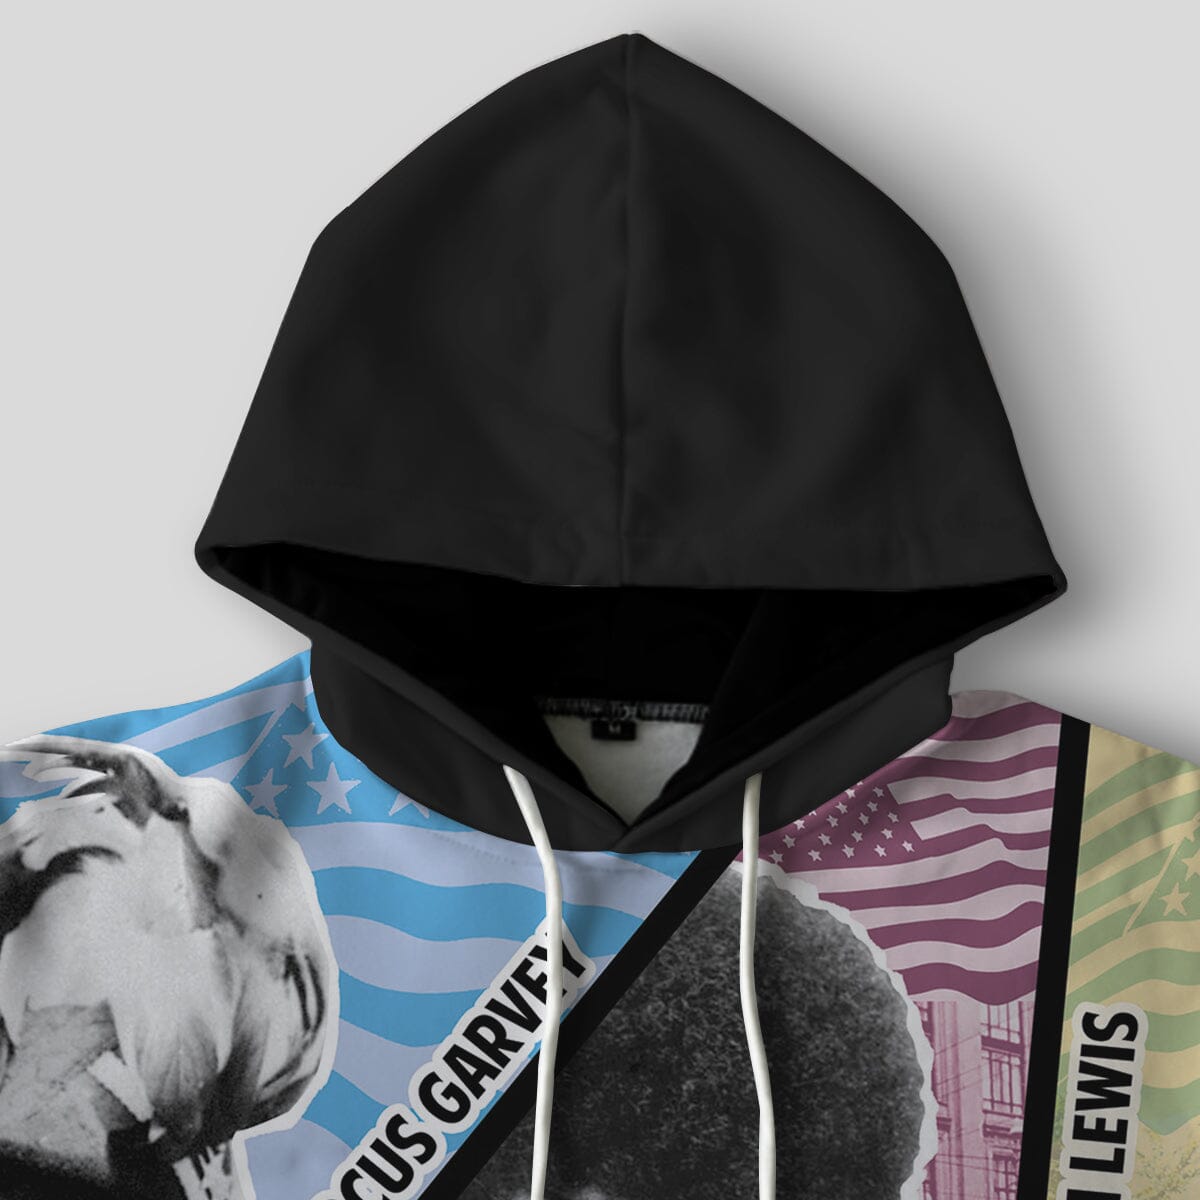 Civil Rights Icons All-over Hoodie Hoodie Tianci 